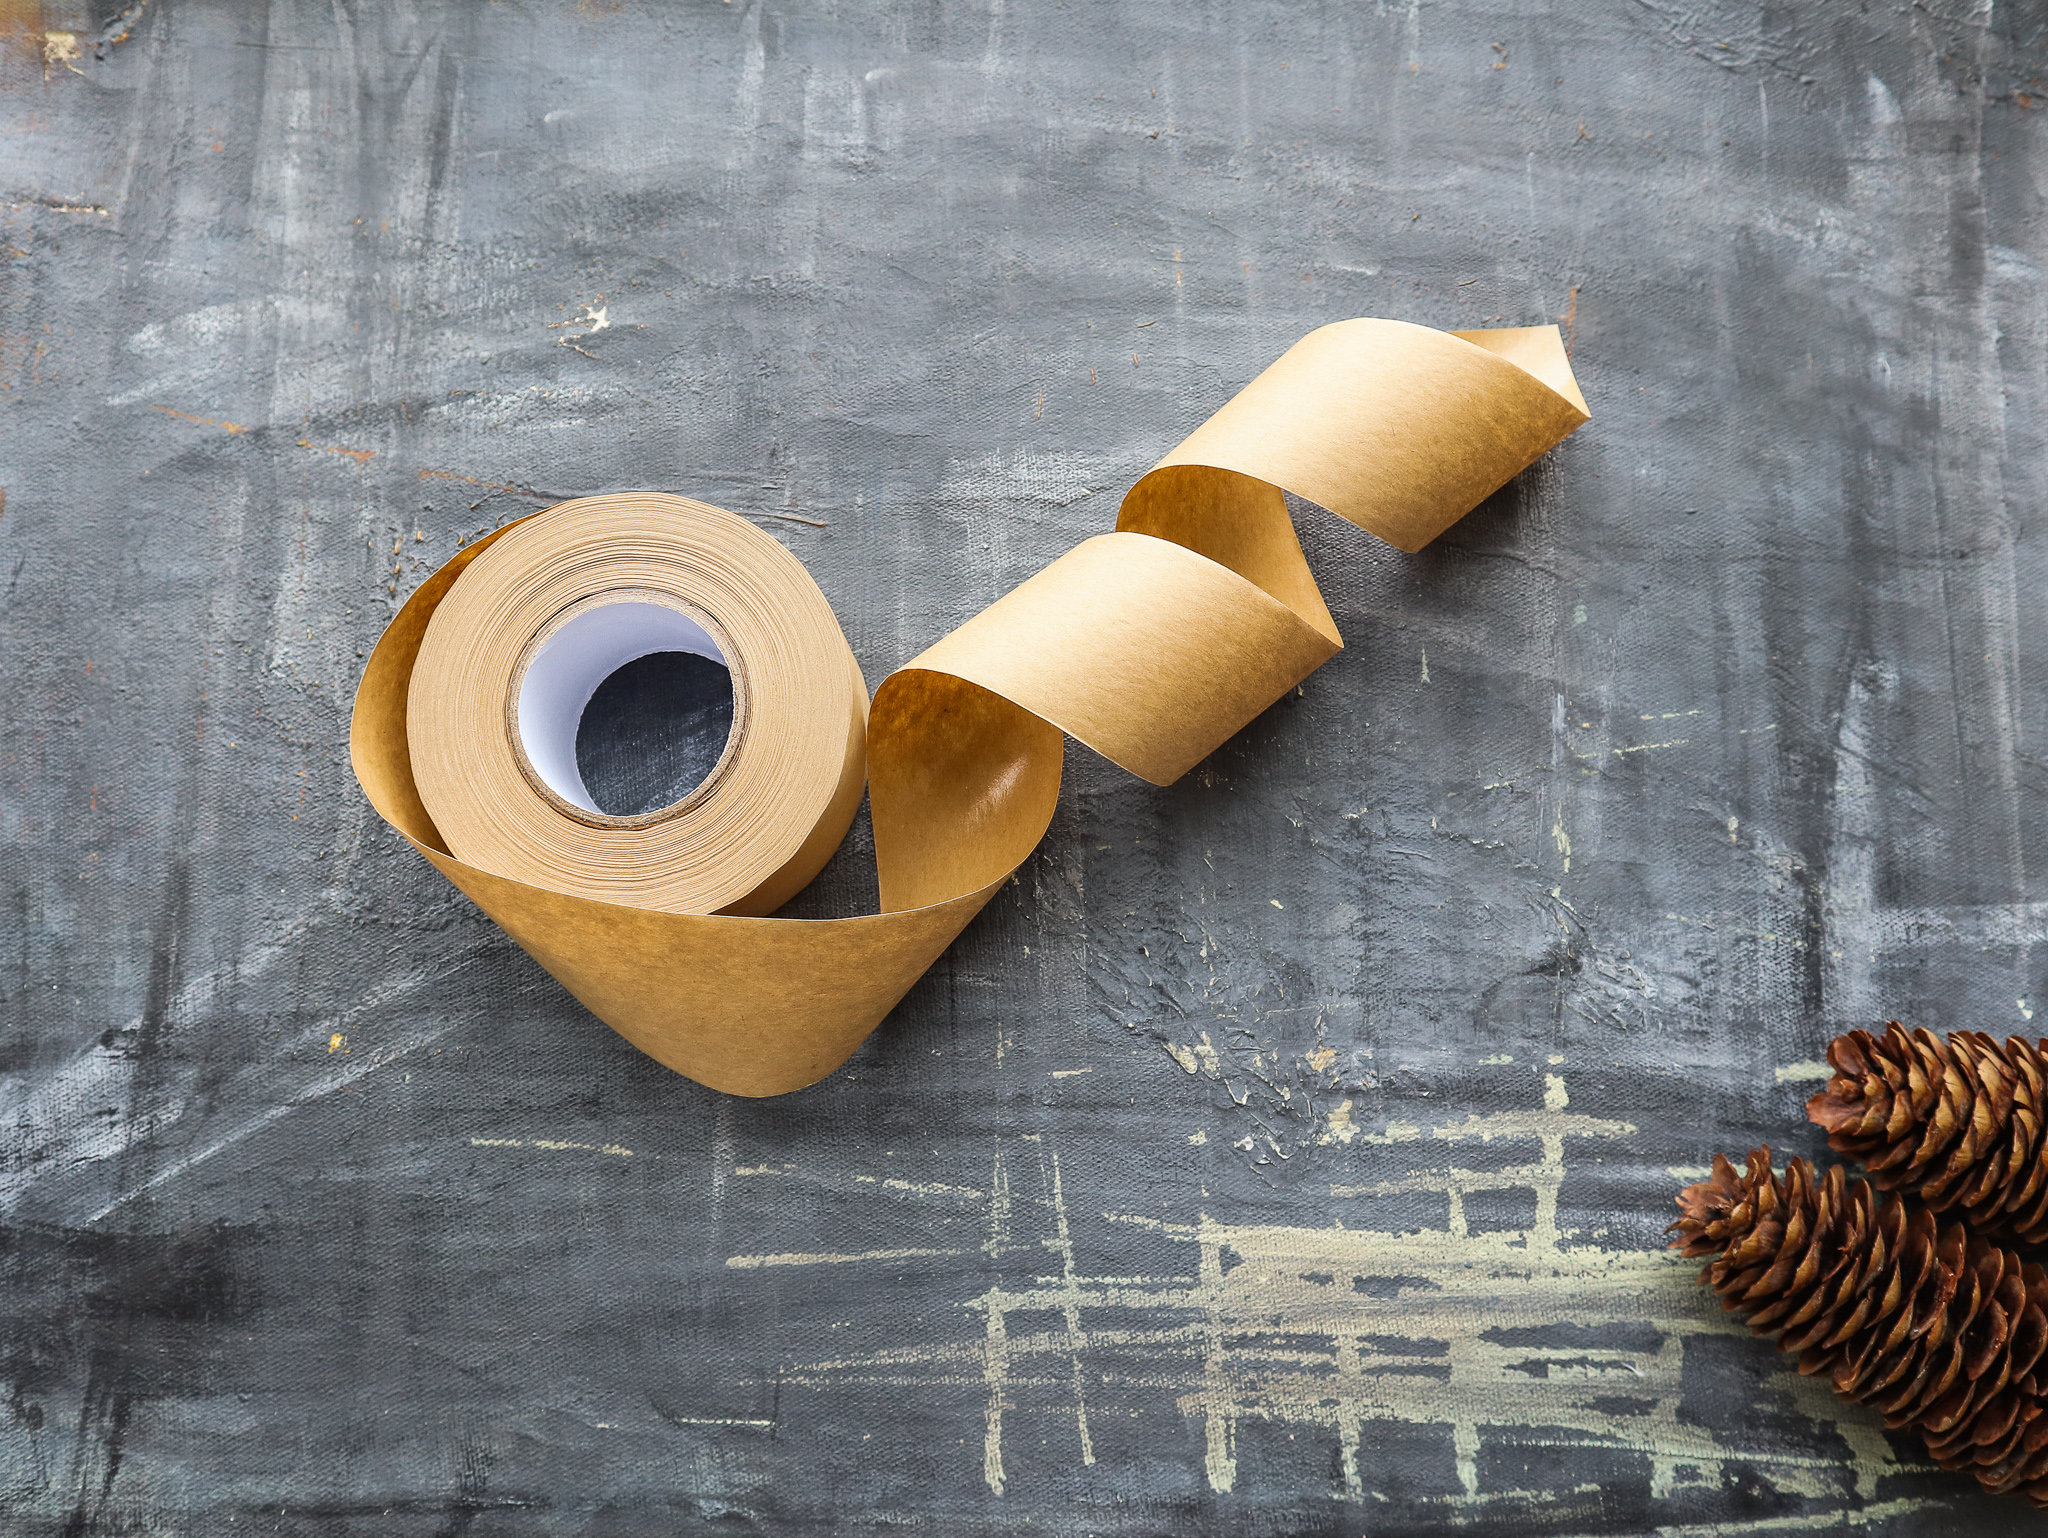 Paper Parcel Tape. Brown Tape Silicone Free Paper. Brown Paper. Recyclable  Tape. 